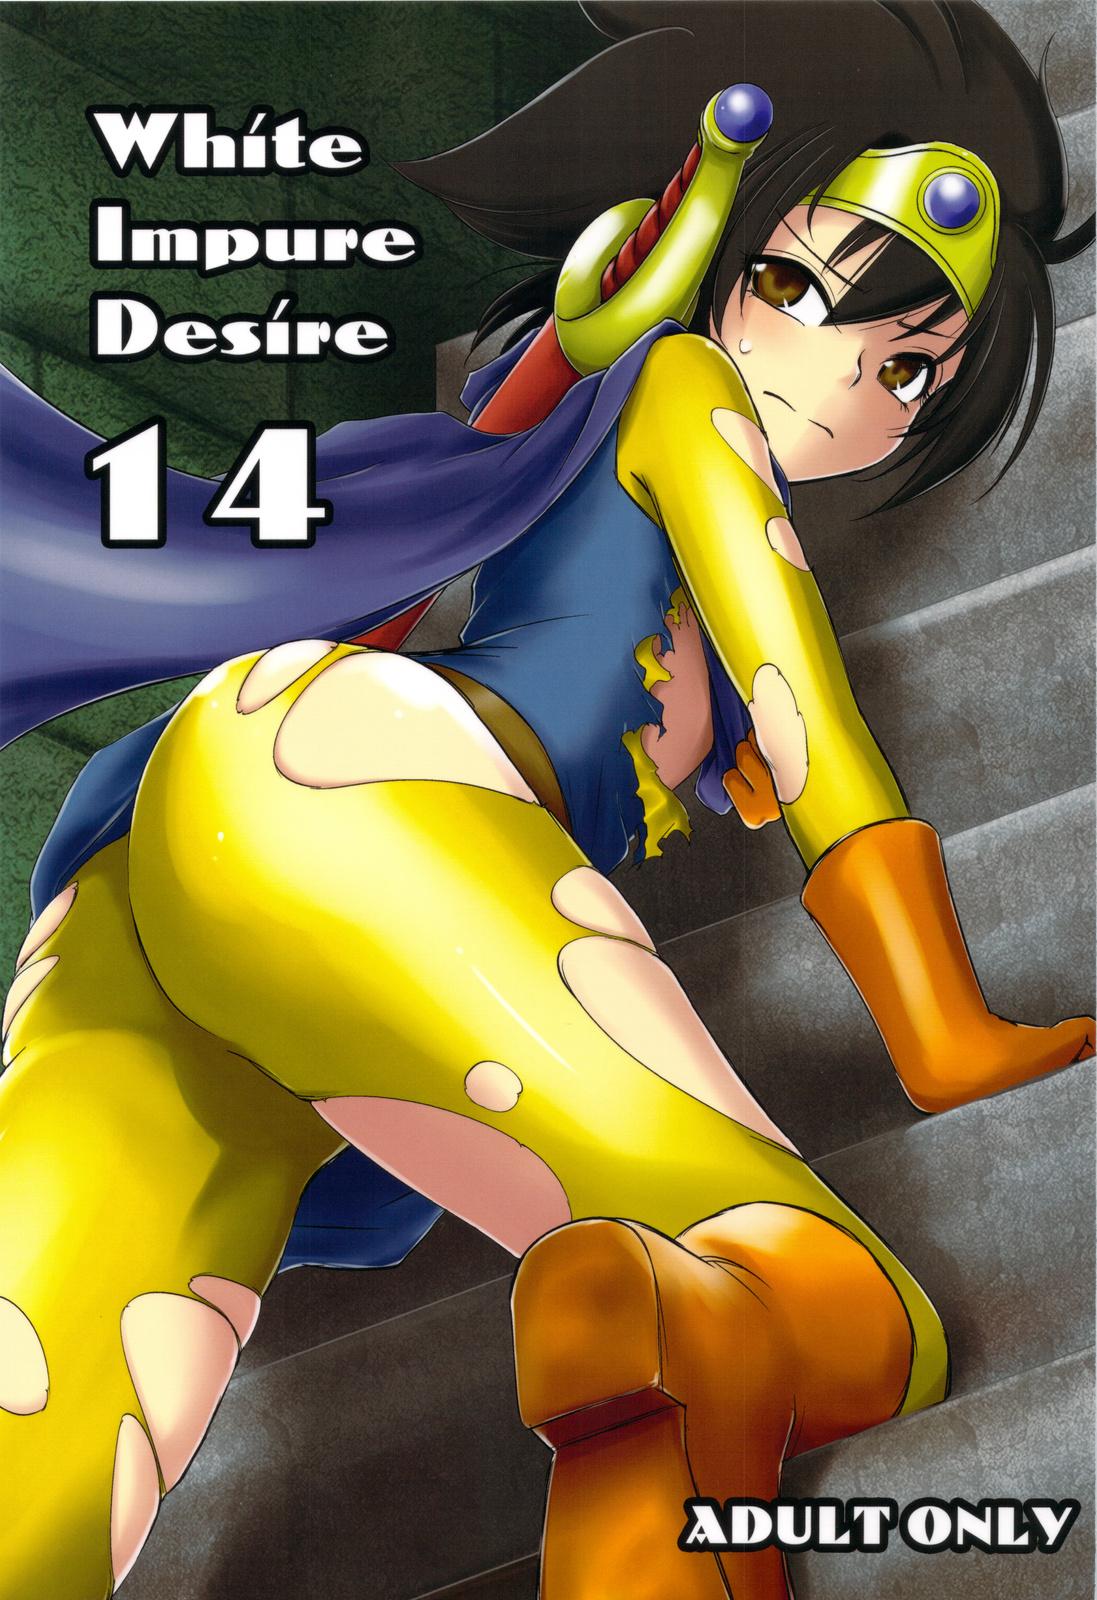 Thong White Impure Desire vol.14 - Dragon quest iii Students - Picture 1